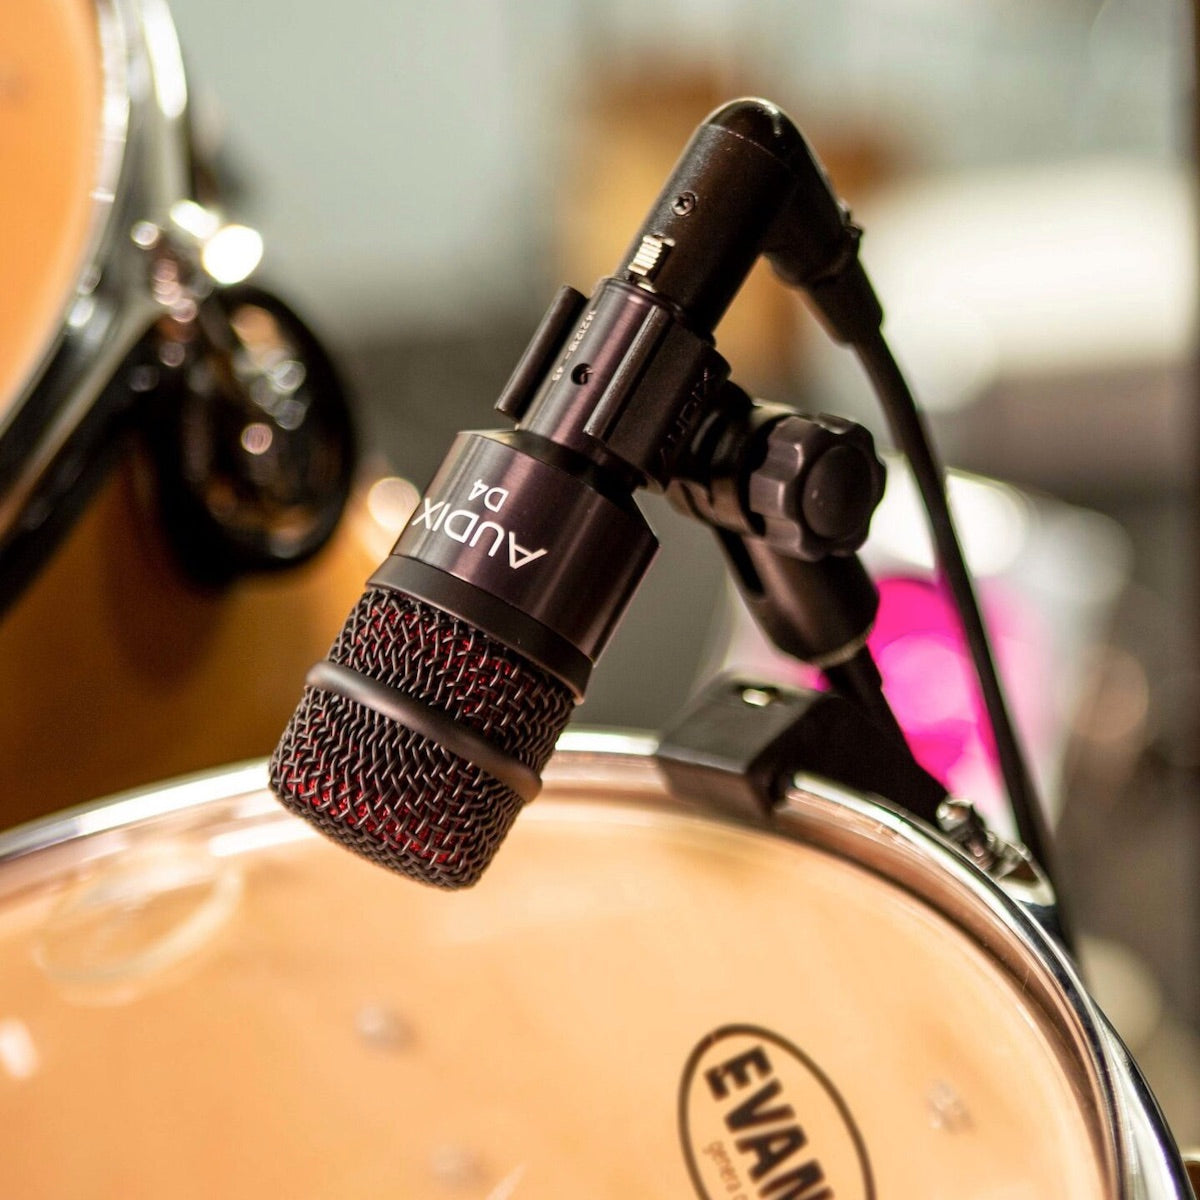 Audix D4 Dynamic Instrument Microphone mounted on a floor tom drum